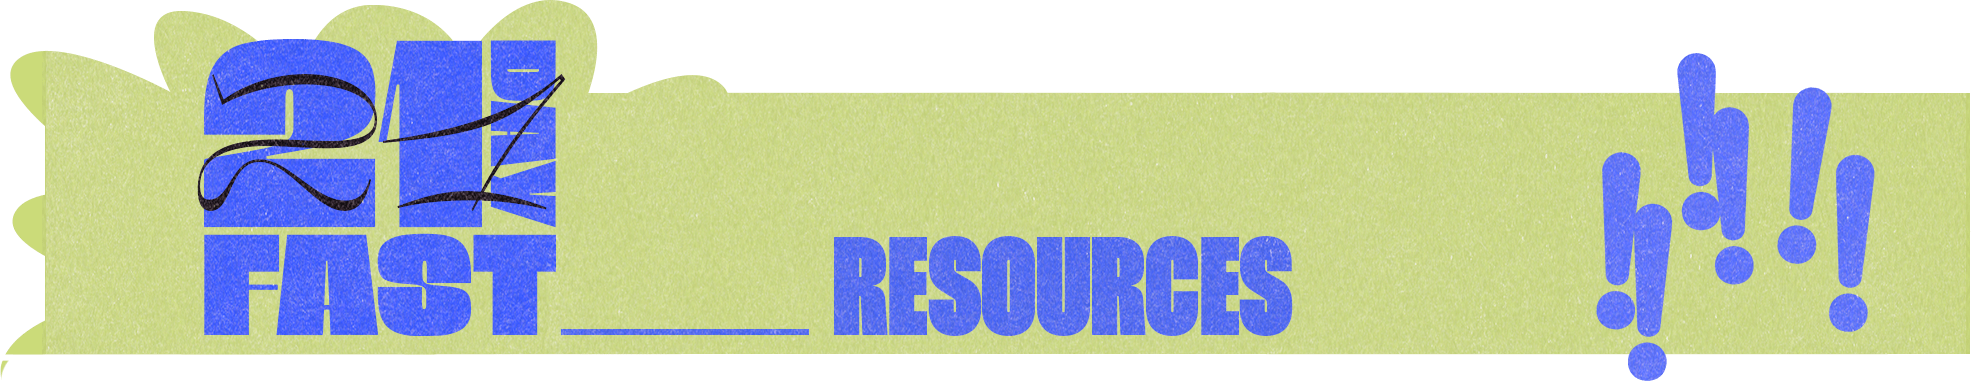 21 day fast resources